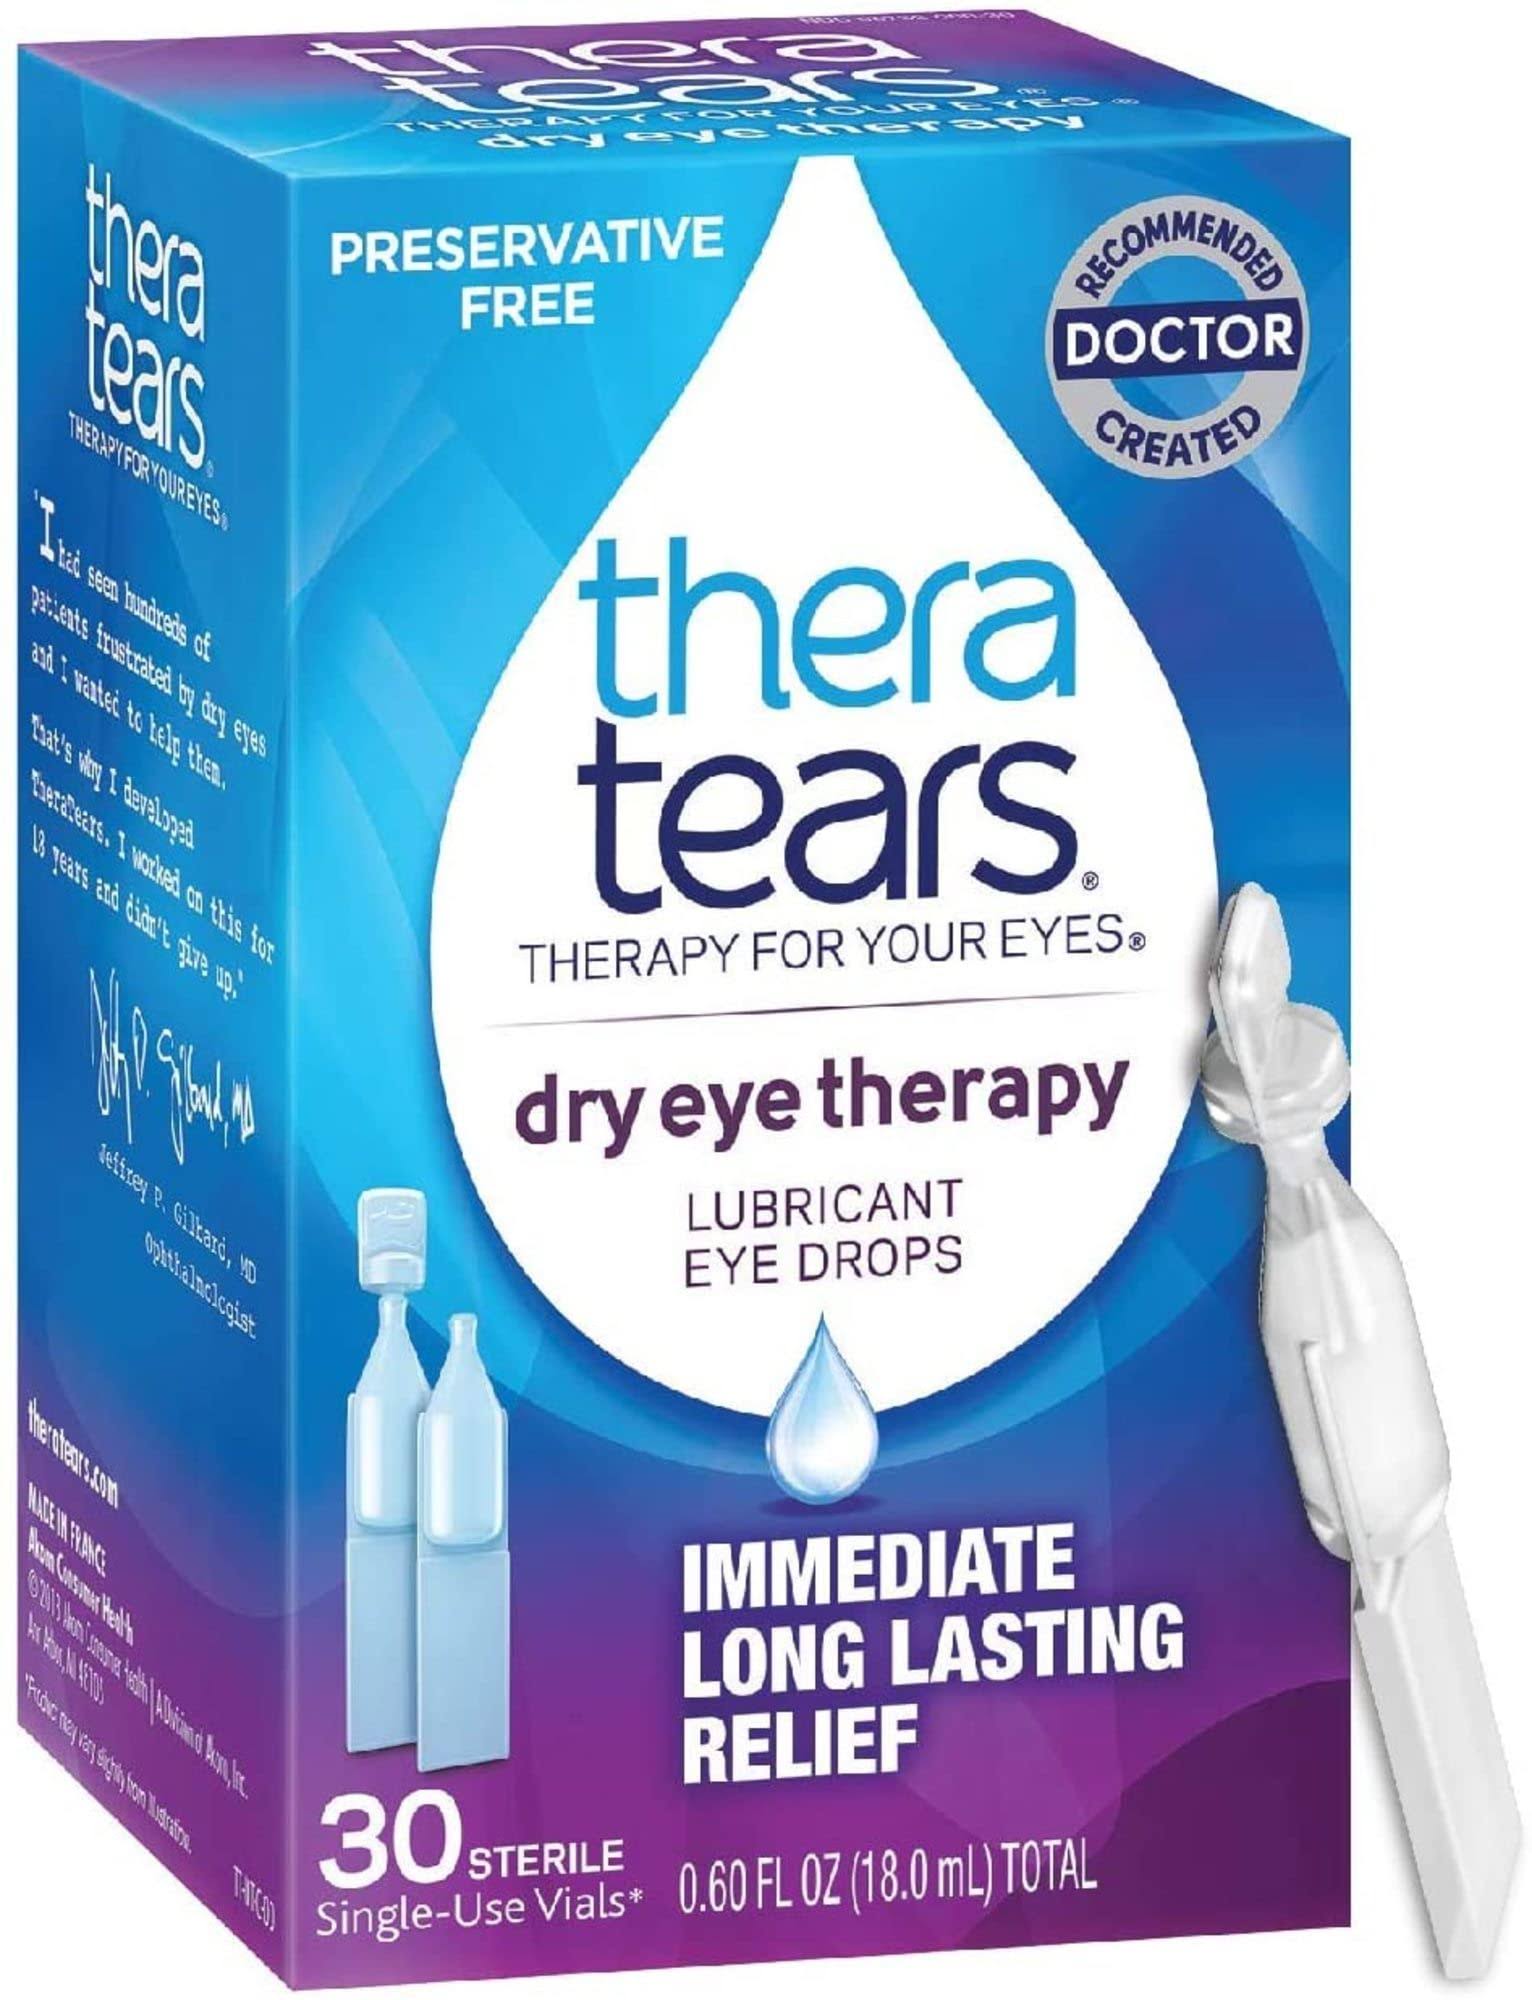 Theratears Dry Eye Therapy Lubricant Eye Drops 0.6 Oz